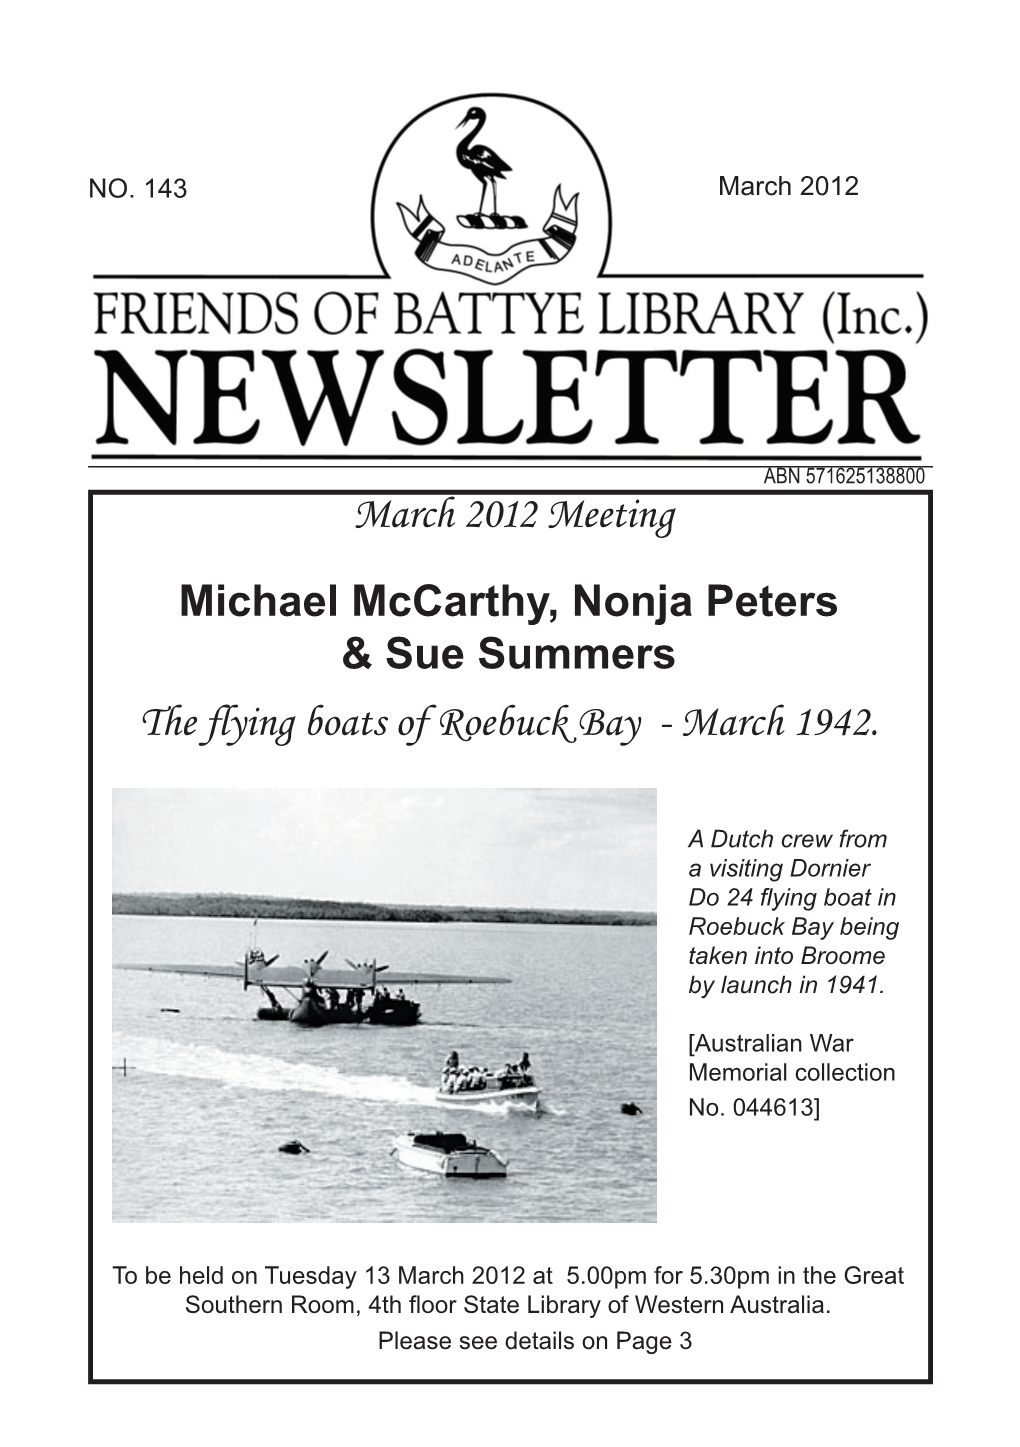 Michael Mccarthy, Nonja Peters & Sue Summers the Flying Boats Of